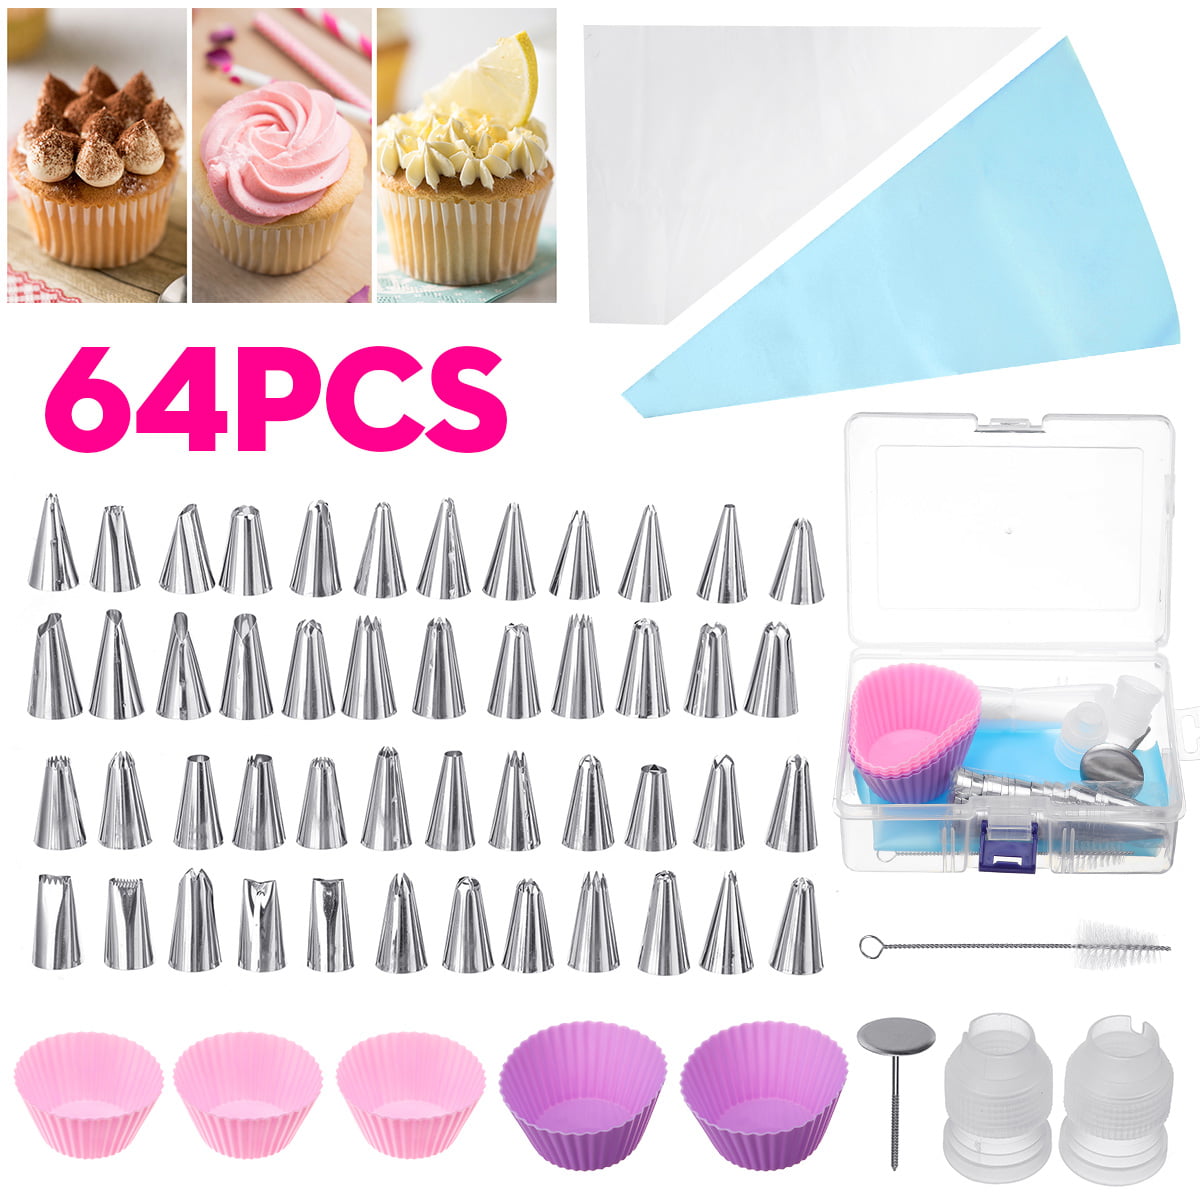 113 Pieces Cake Decorating Kits Supplies，48 Numbered Icing Tips，52 Pastry Bags，10 Reusable Couplers，1 Icing Spatula，2 Reusable Silicone Frosting Bags for Cake Decoration Baking Tools 